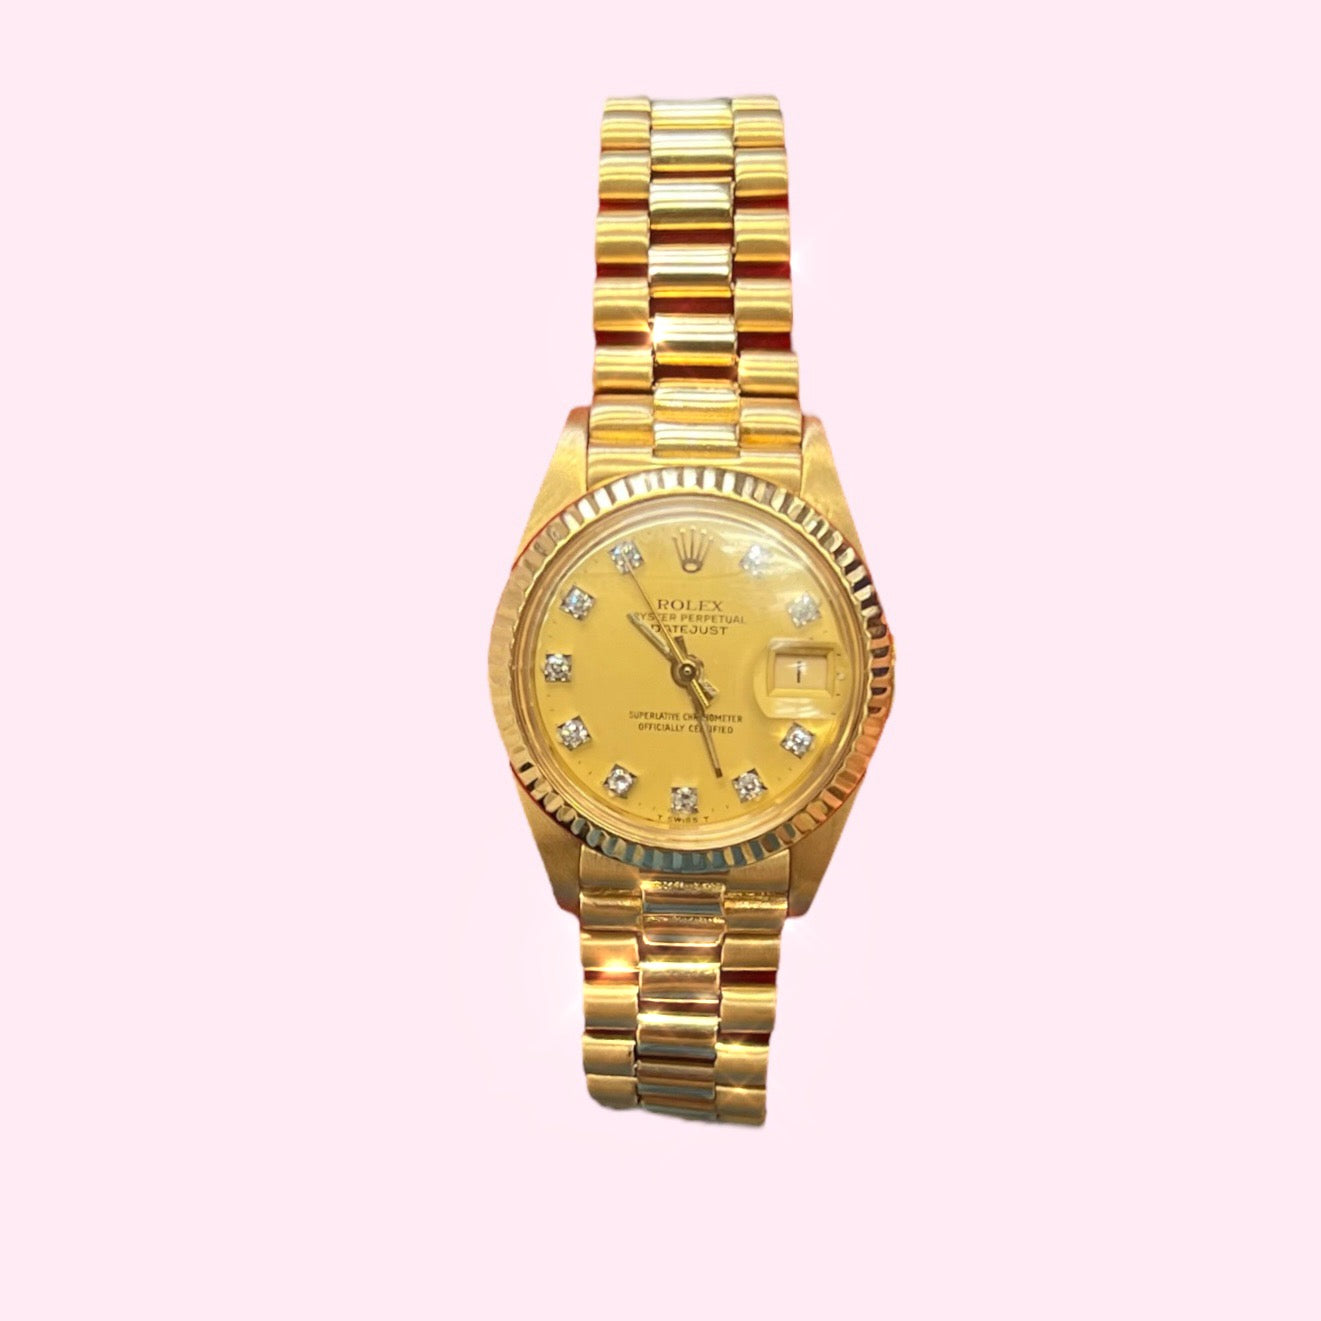 Solid 18K Yellow Gold Rolex Watch